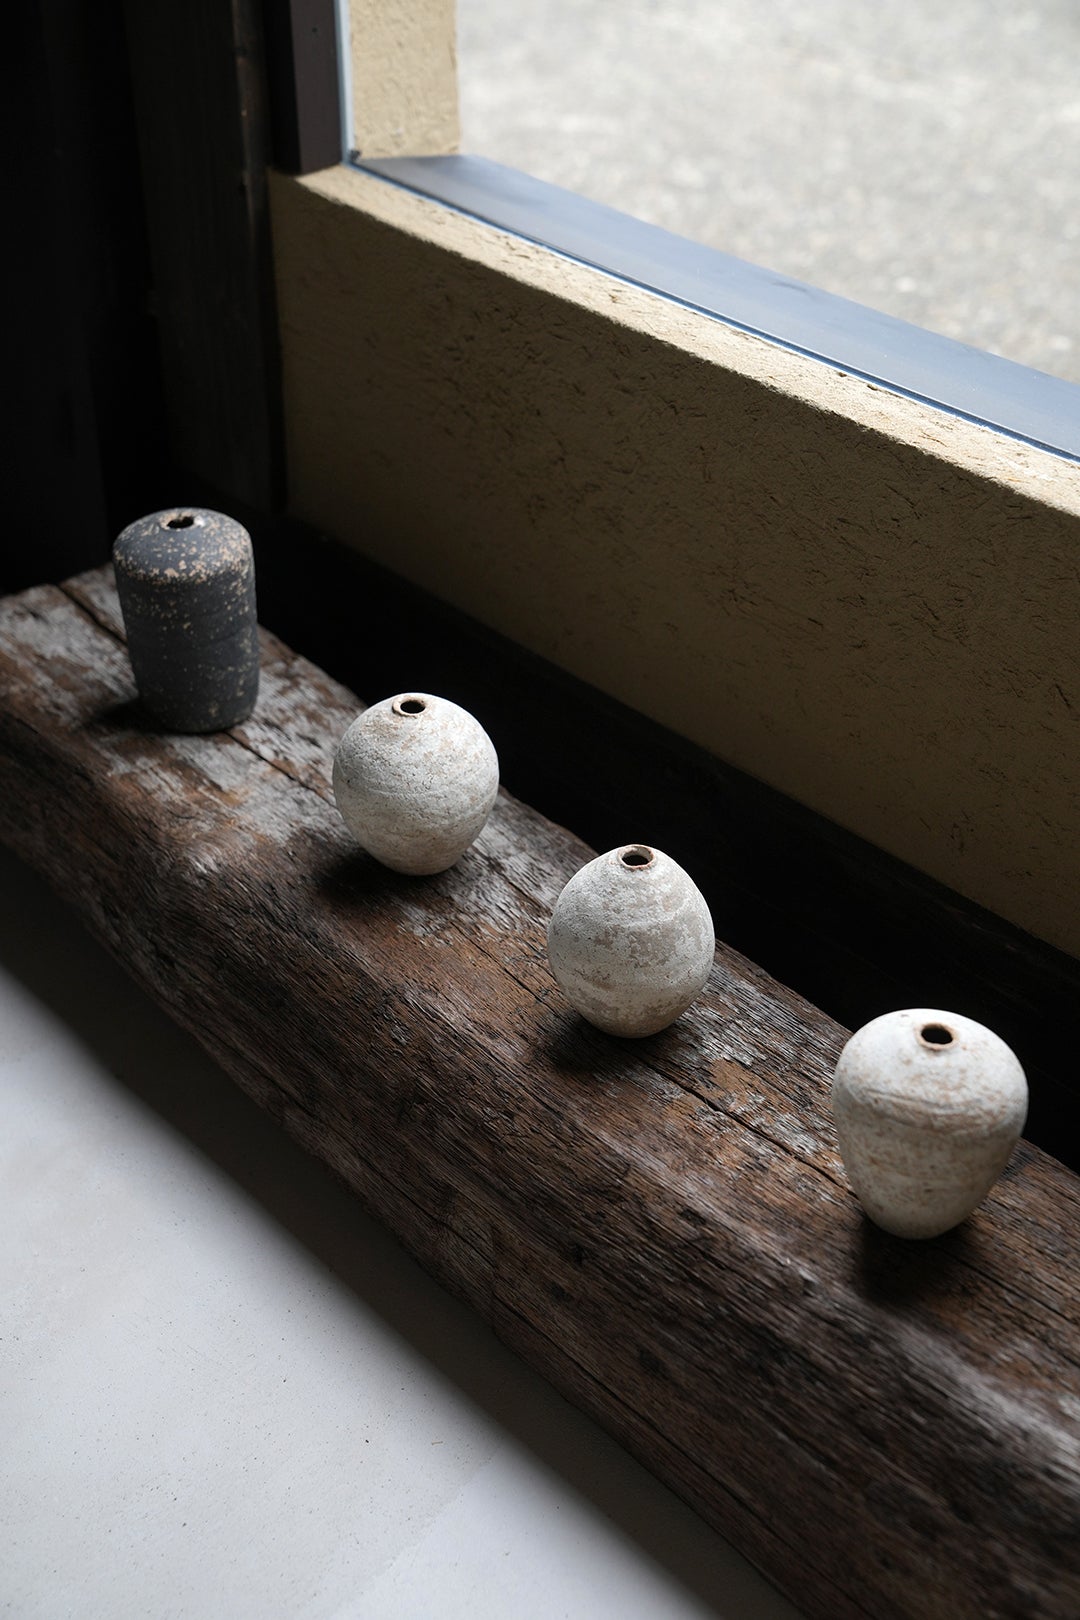 More Than 20 Ancient Japanese Techniques Are on Display at This Modern Kyoto Home Store